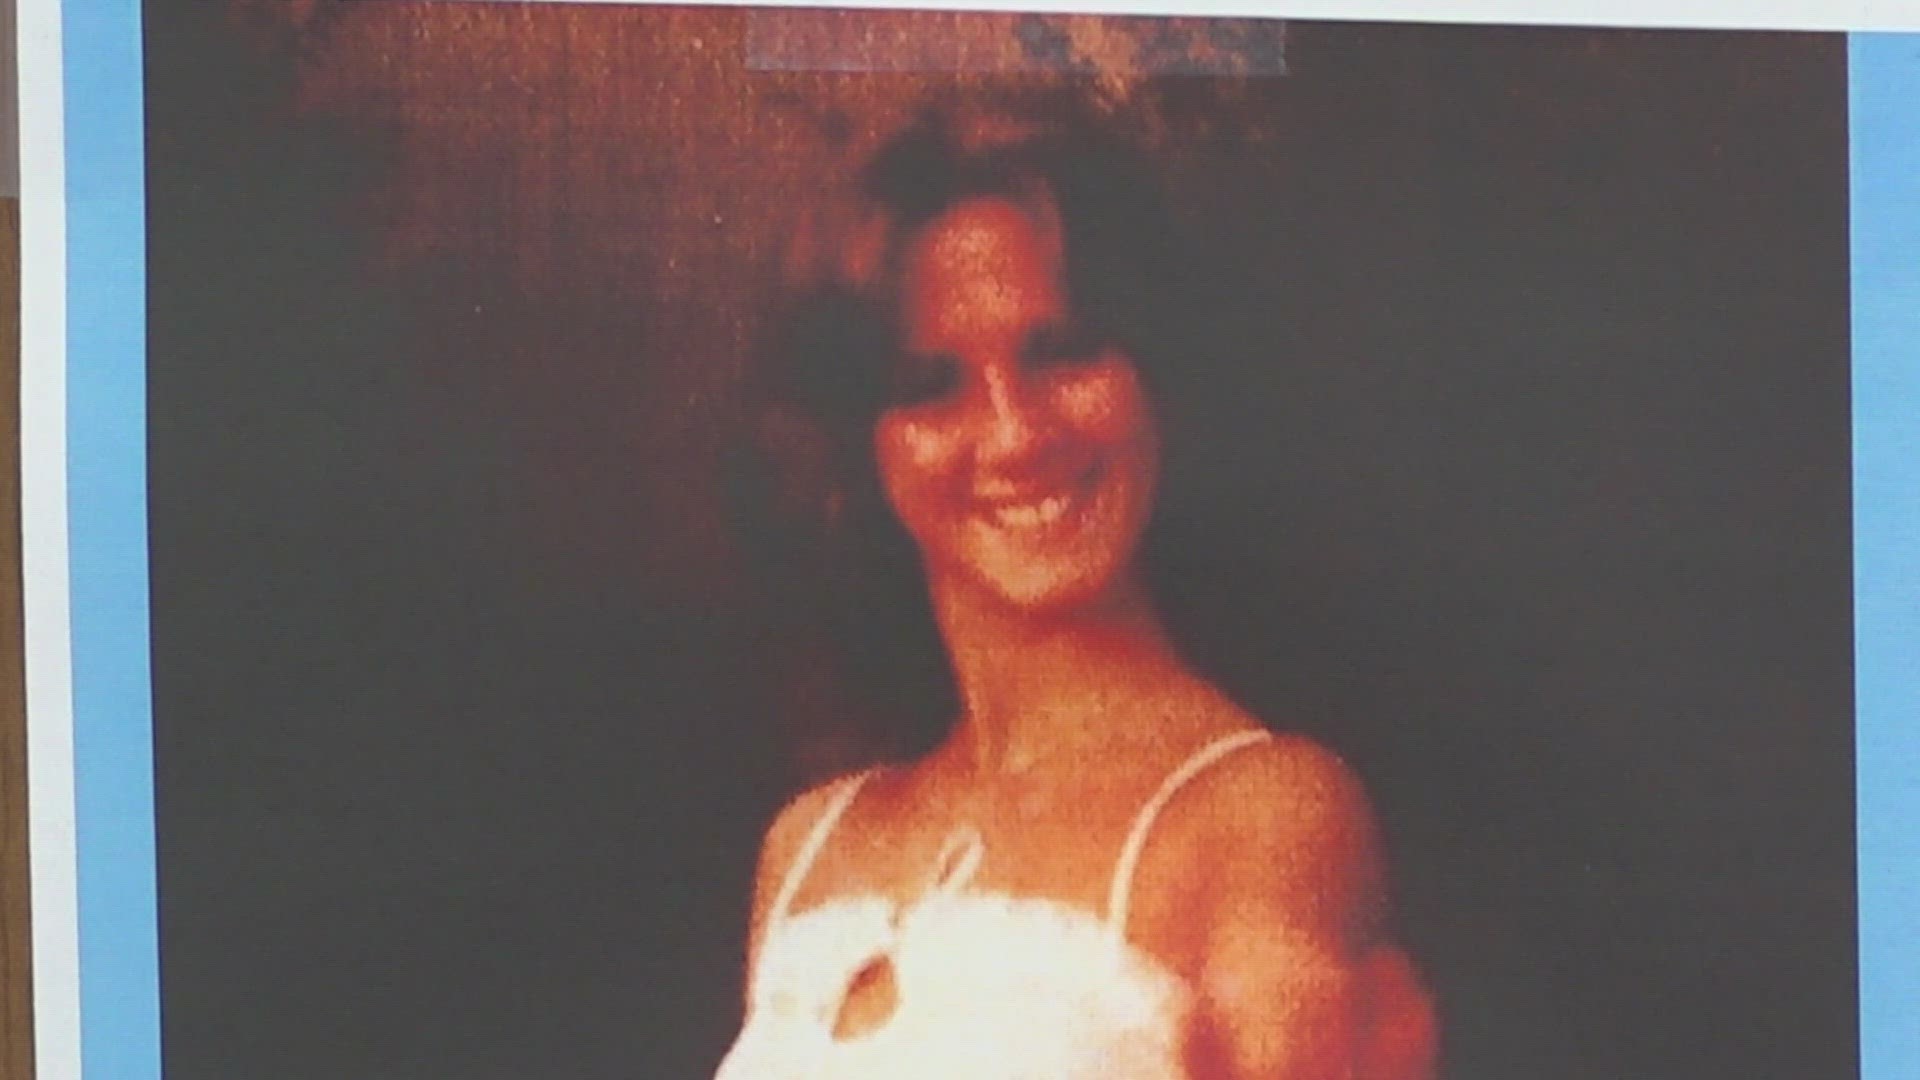 Tammy Sue Aldridge died in the 1970s. Investigators now know who killed her.